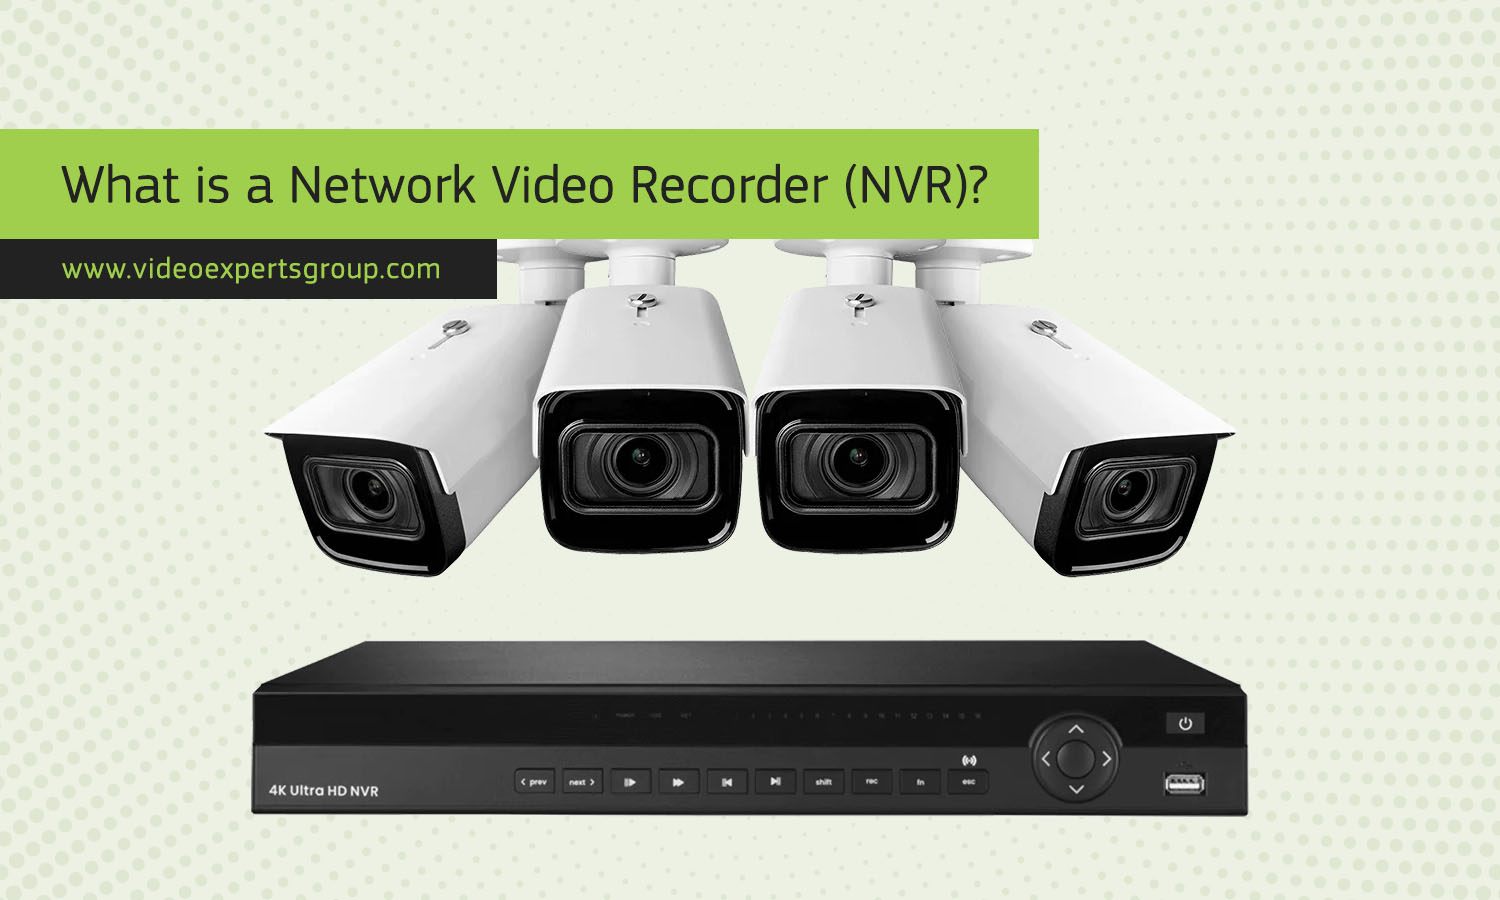 What is an NVR?